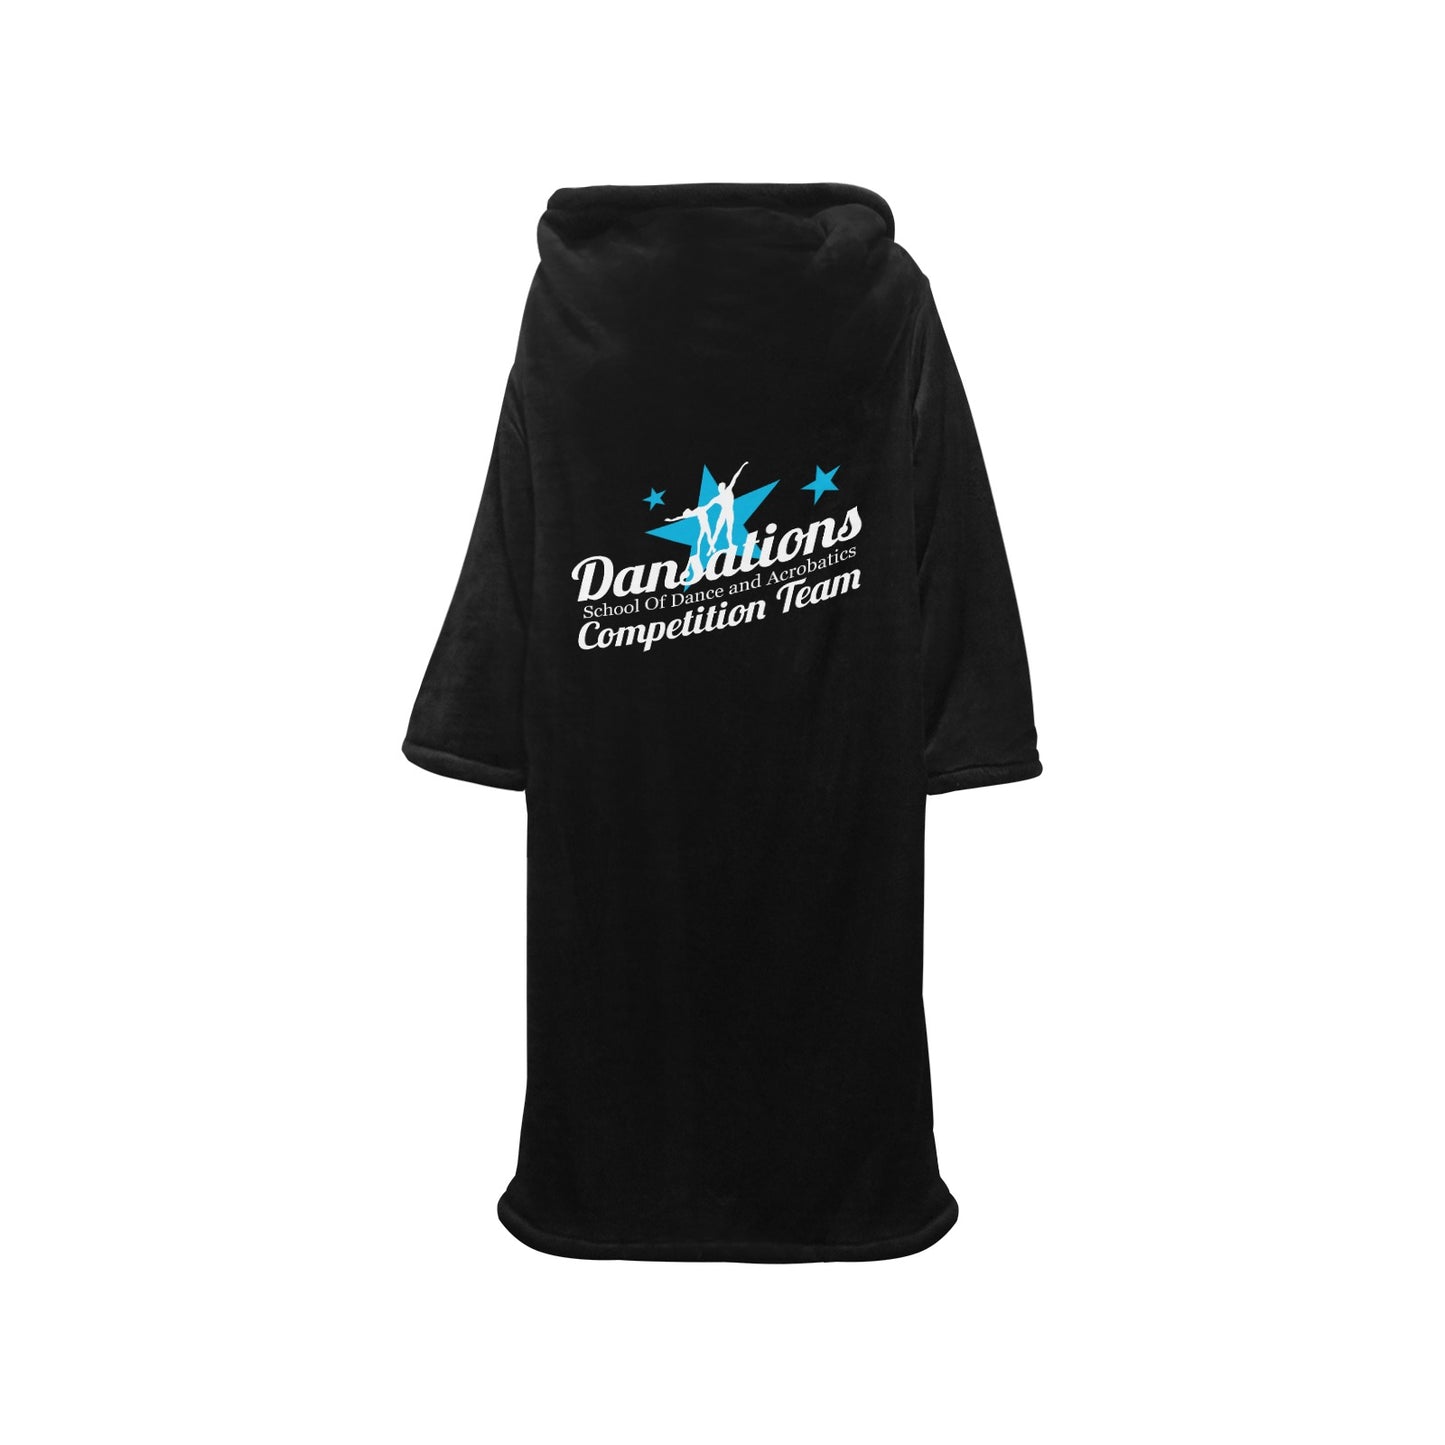 Dansations Competition Team Blanket Robe with Sleeves for Adults